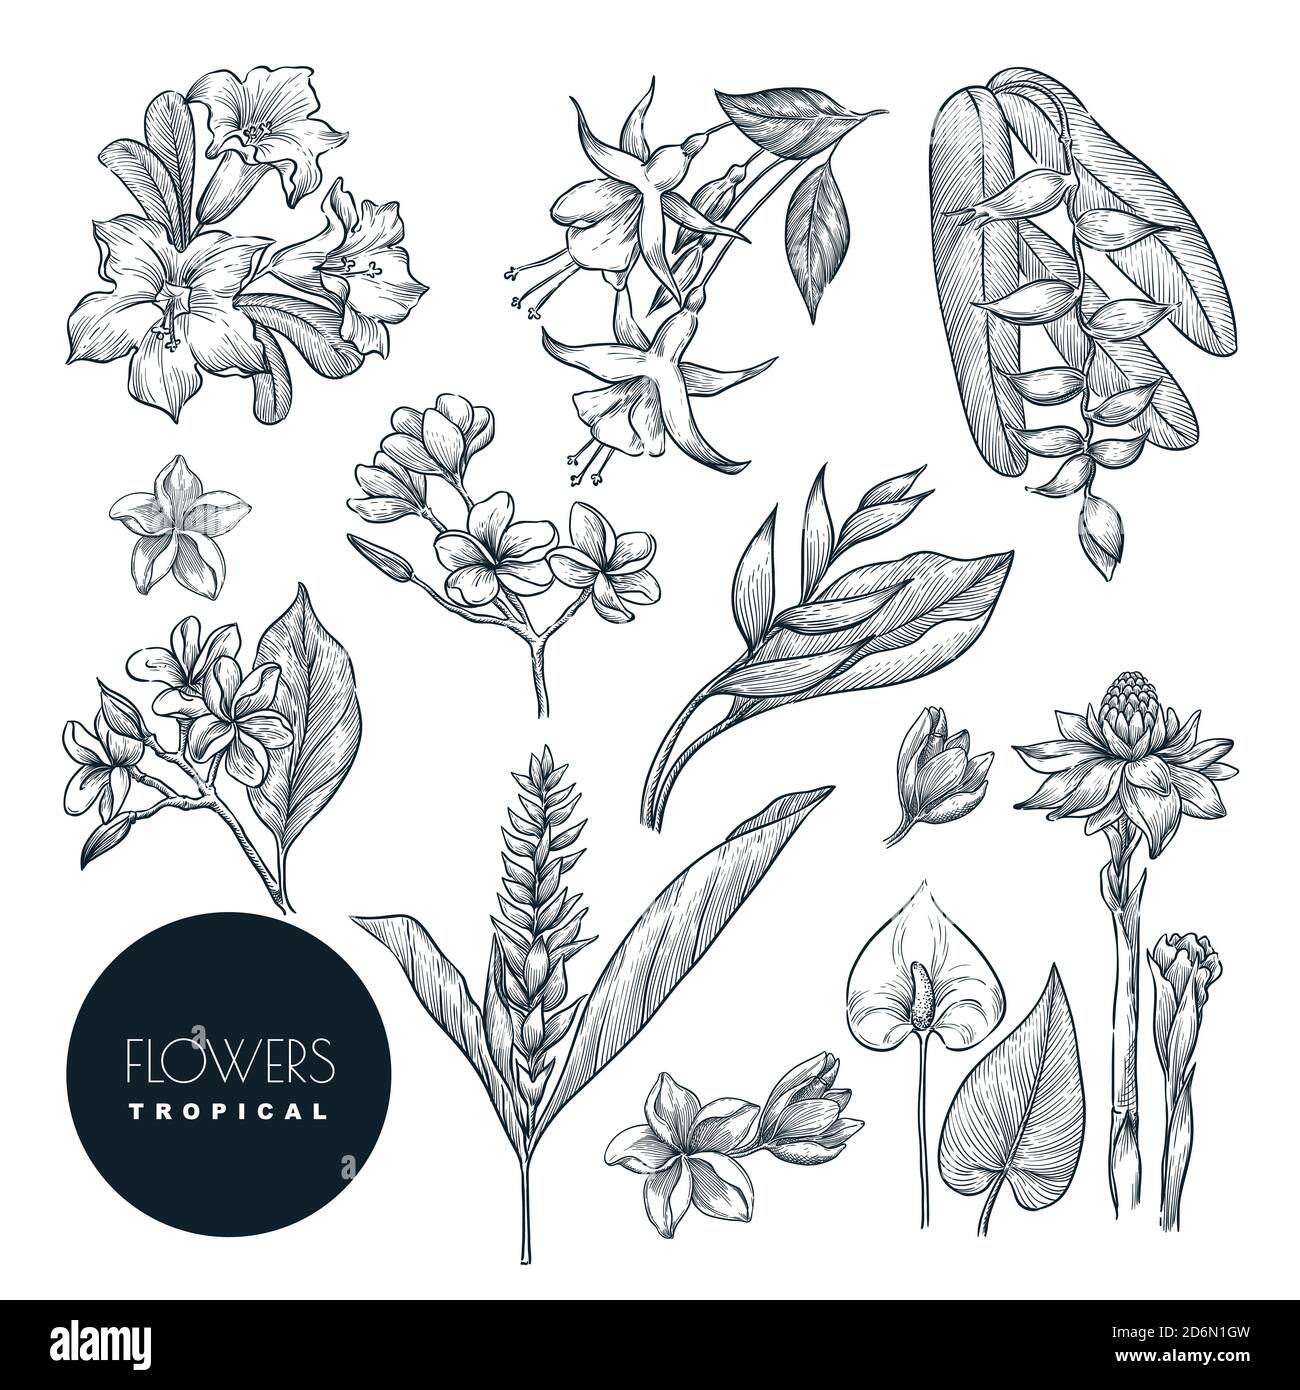 Tropical exotic flowers set, isolated on white background. Vector sketch illustration. Hand drawn tropic nature and floral design elements. Stock Vector